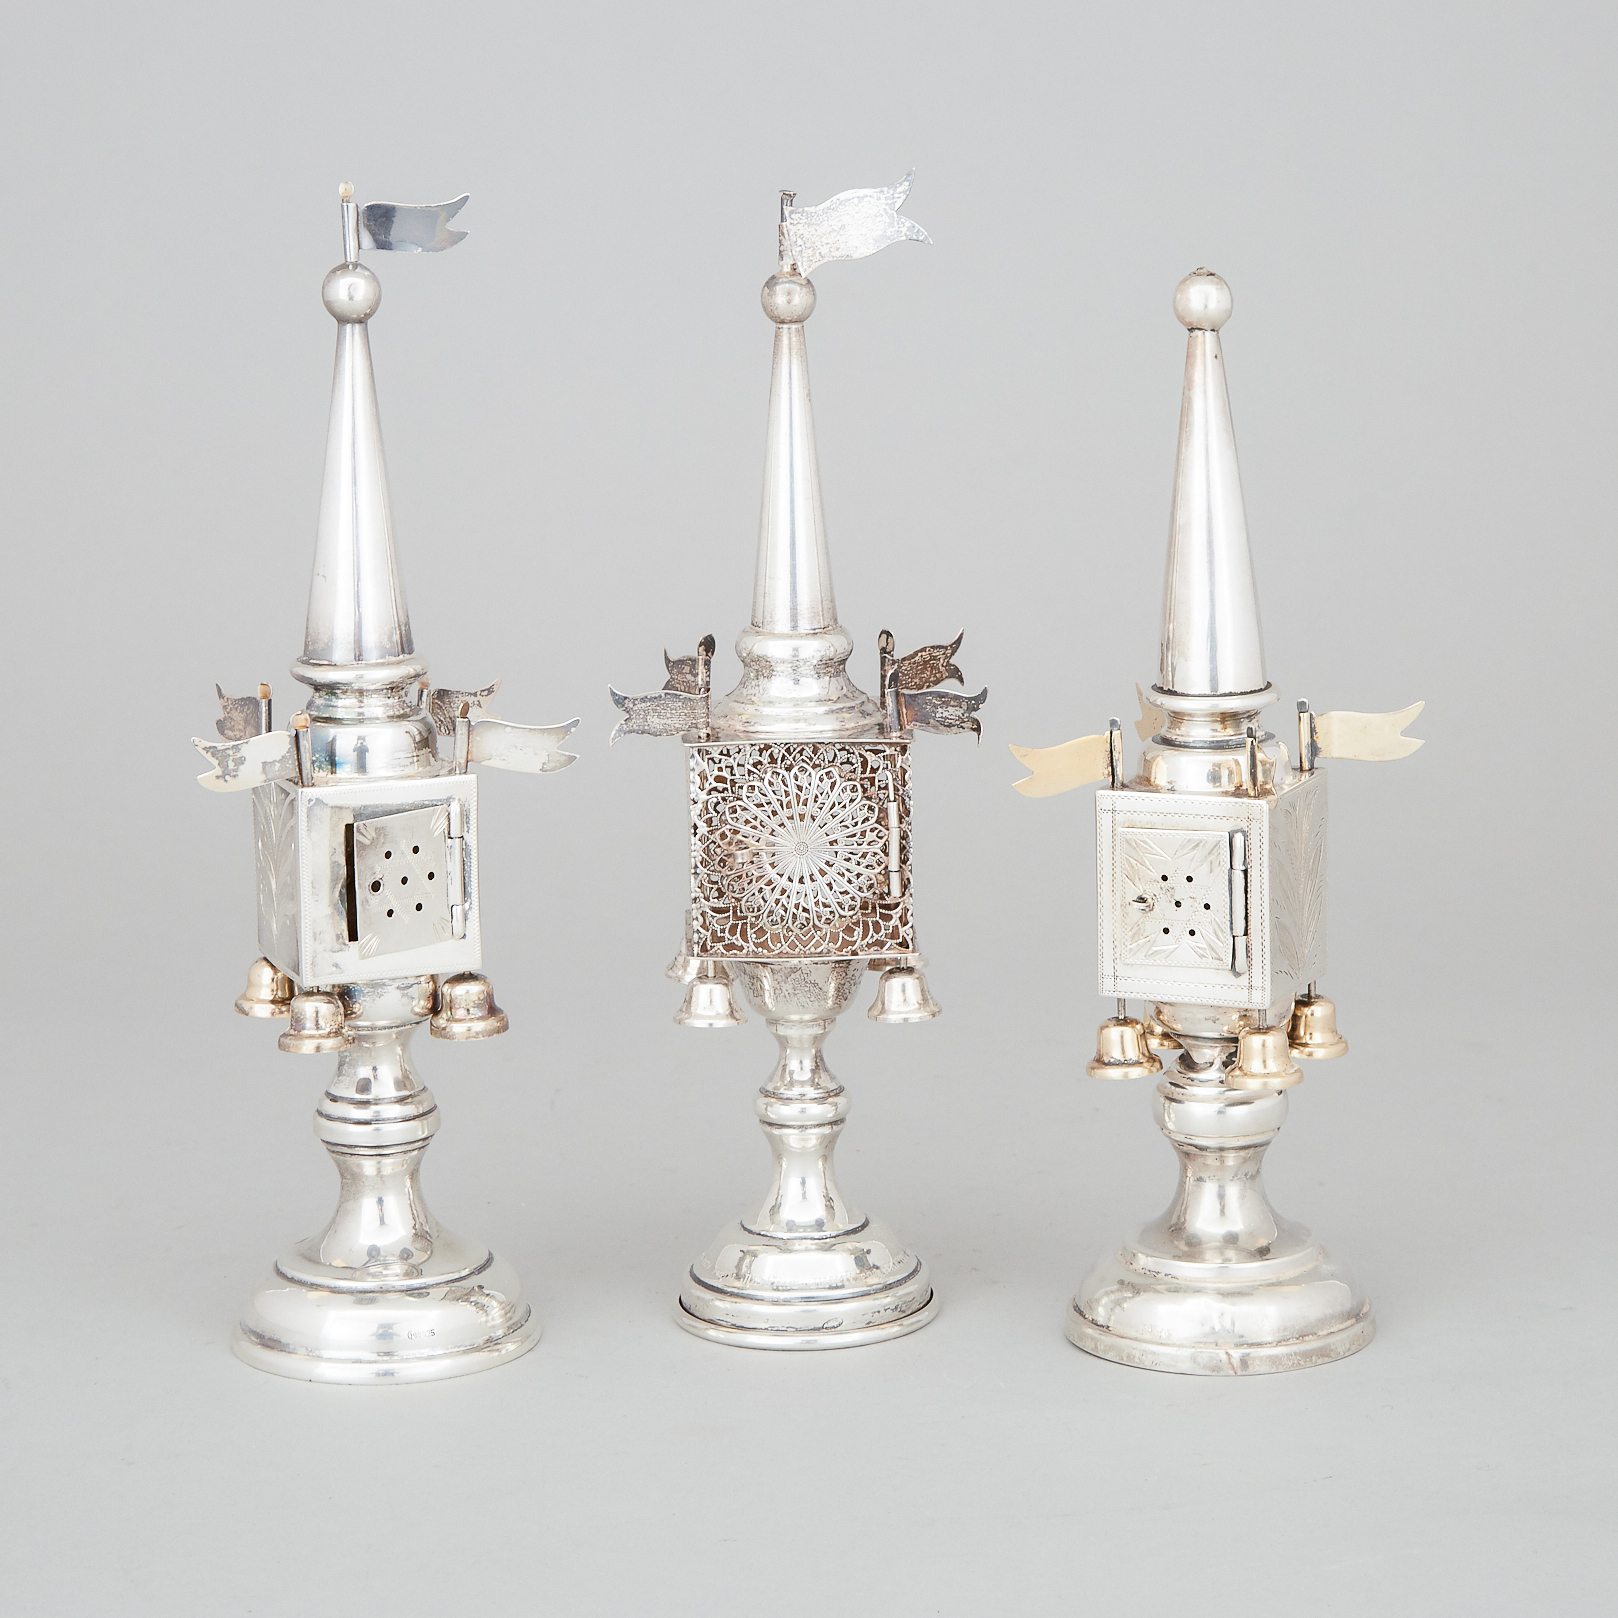 Three German and American Silver Spice Towers, 20th century